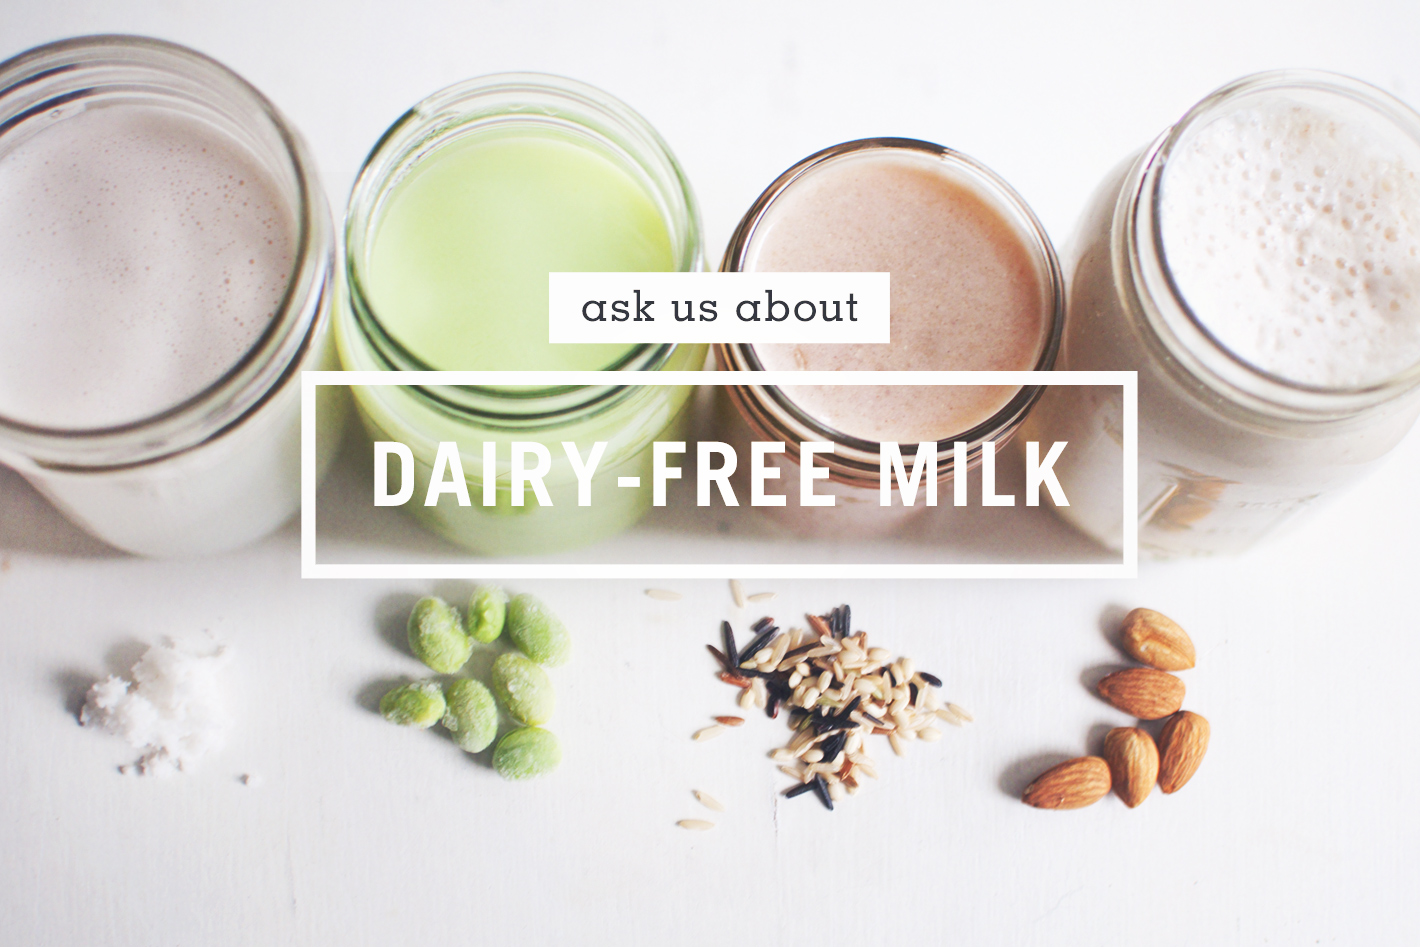 What's the best dairy free alternative?